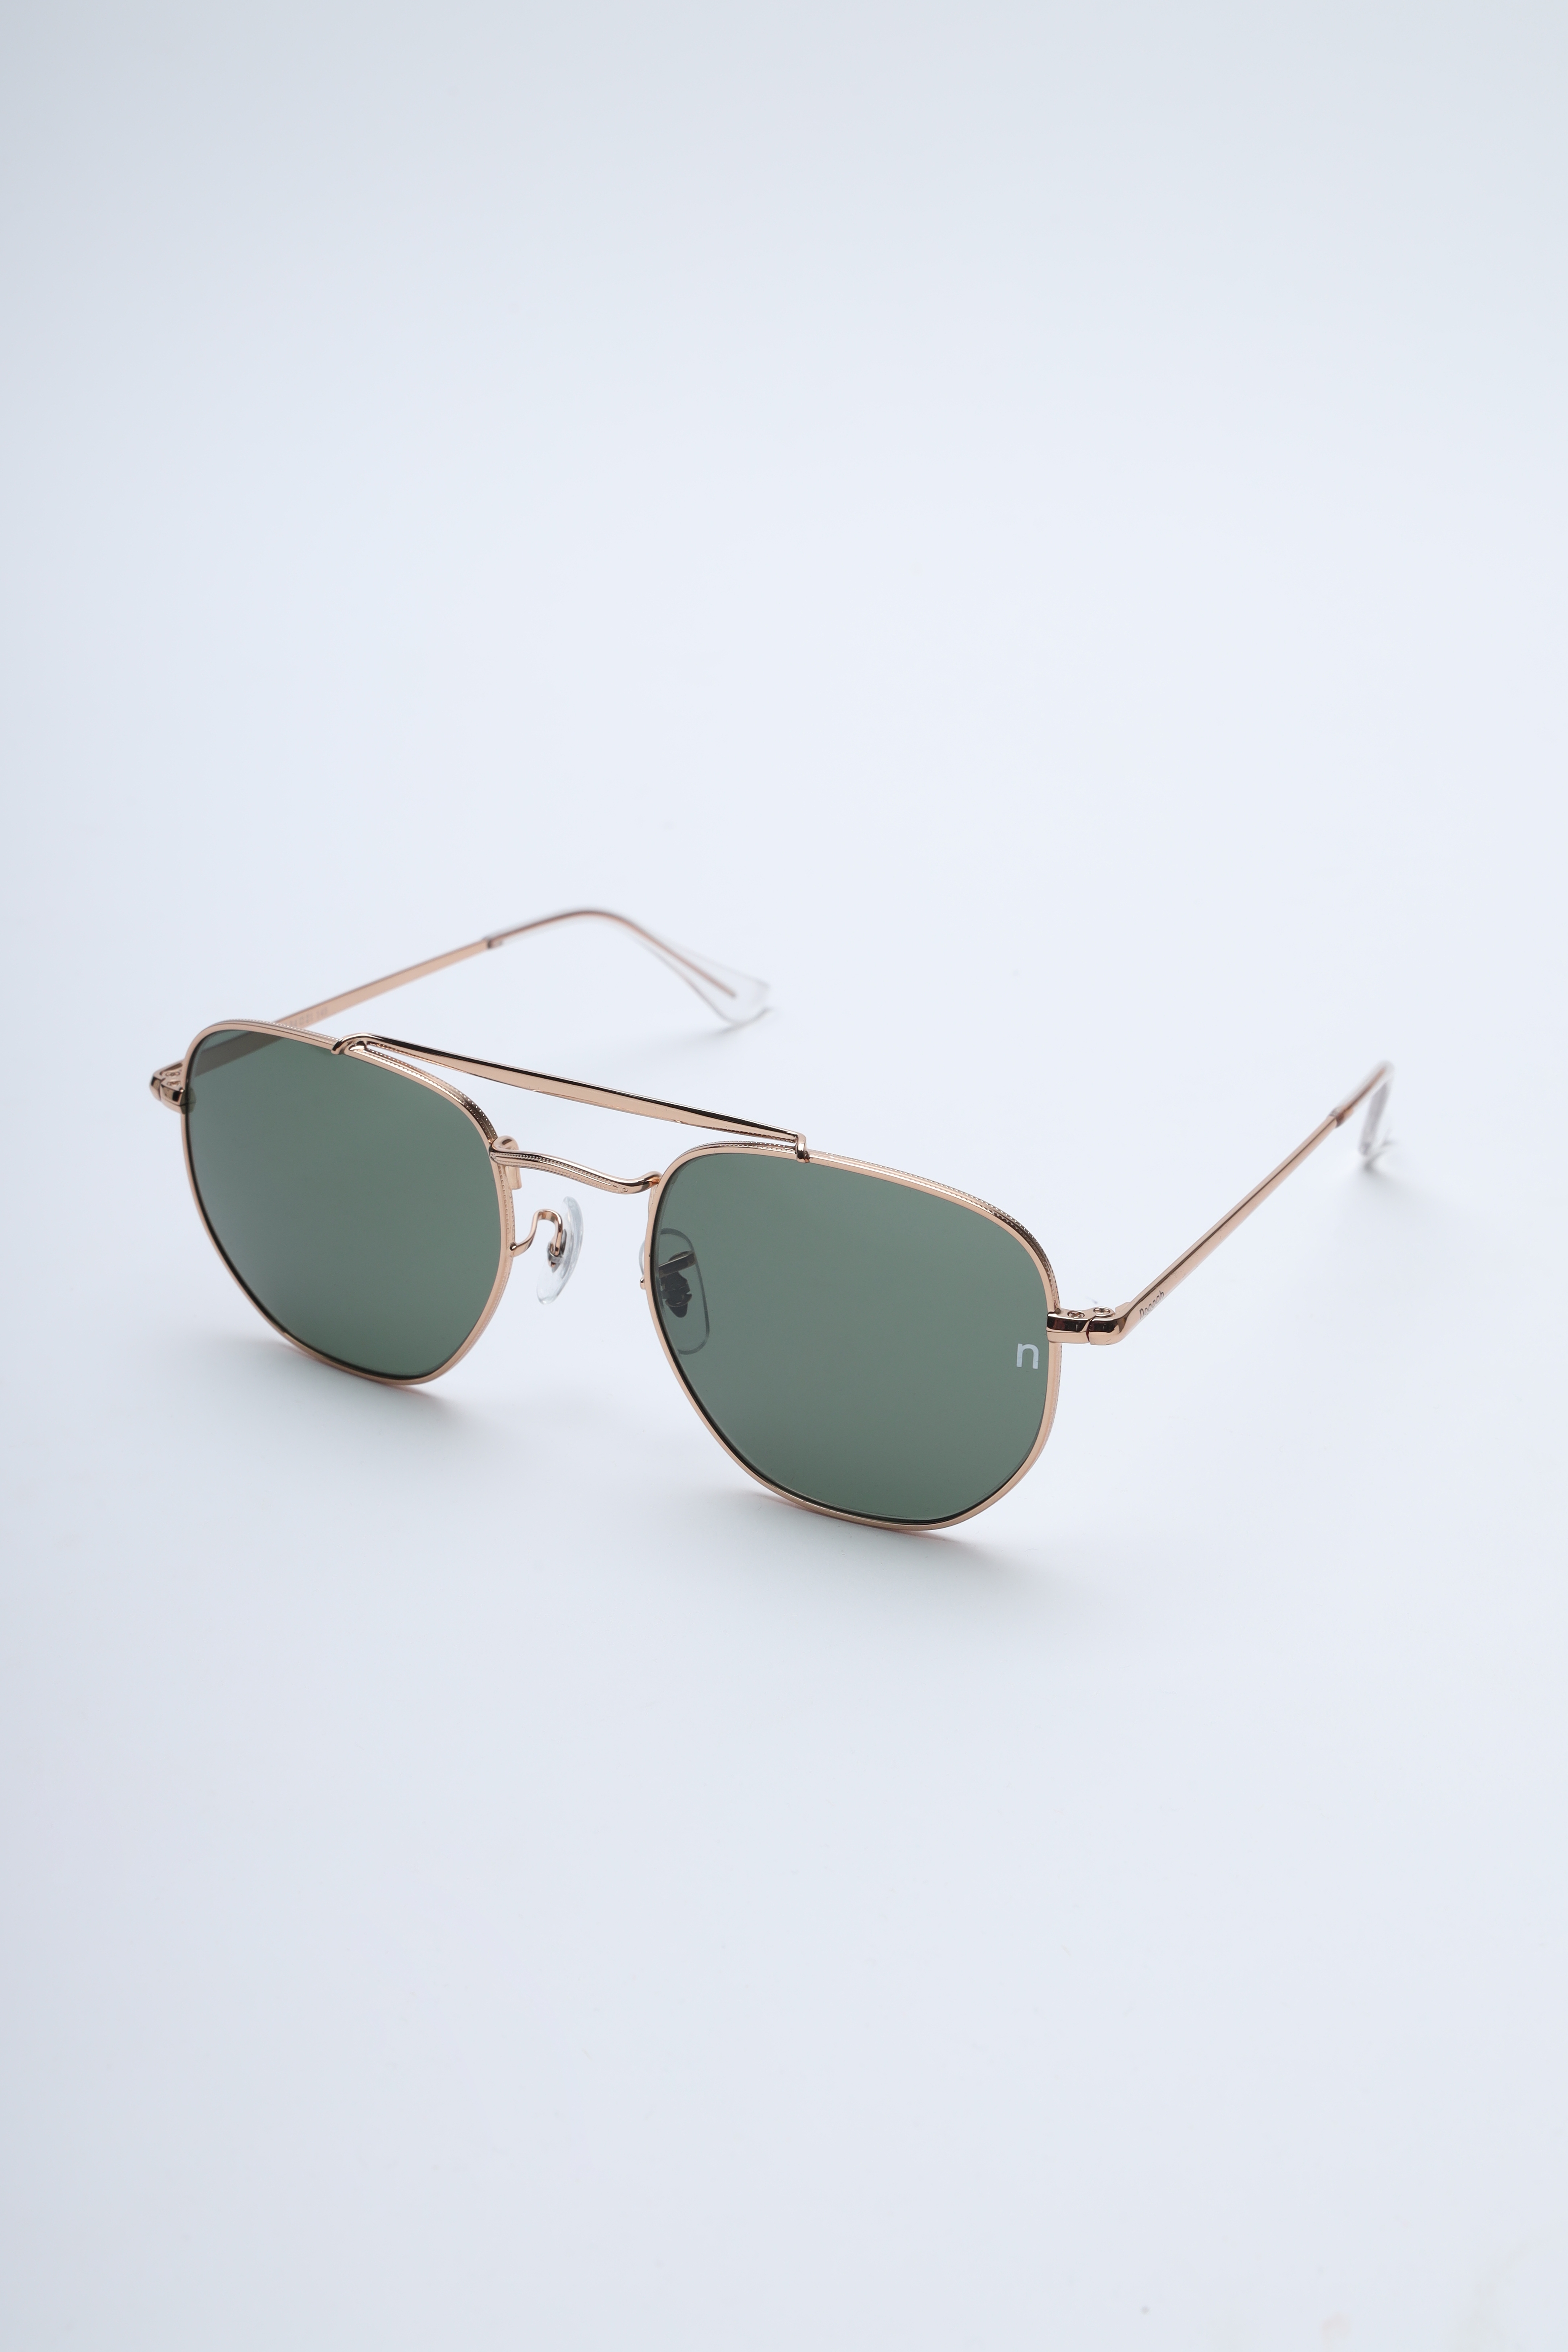 Noggah | Noggah Stainless Steel Gold Frame with Green Glass UV Protection Lens  Large Size Unisex Sunglasses 